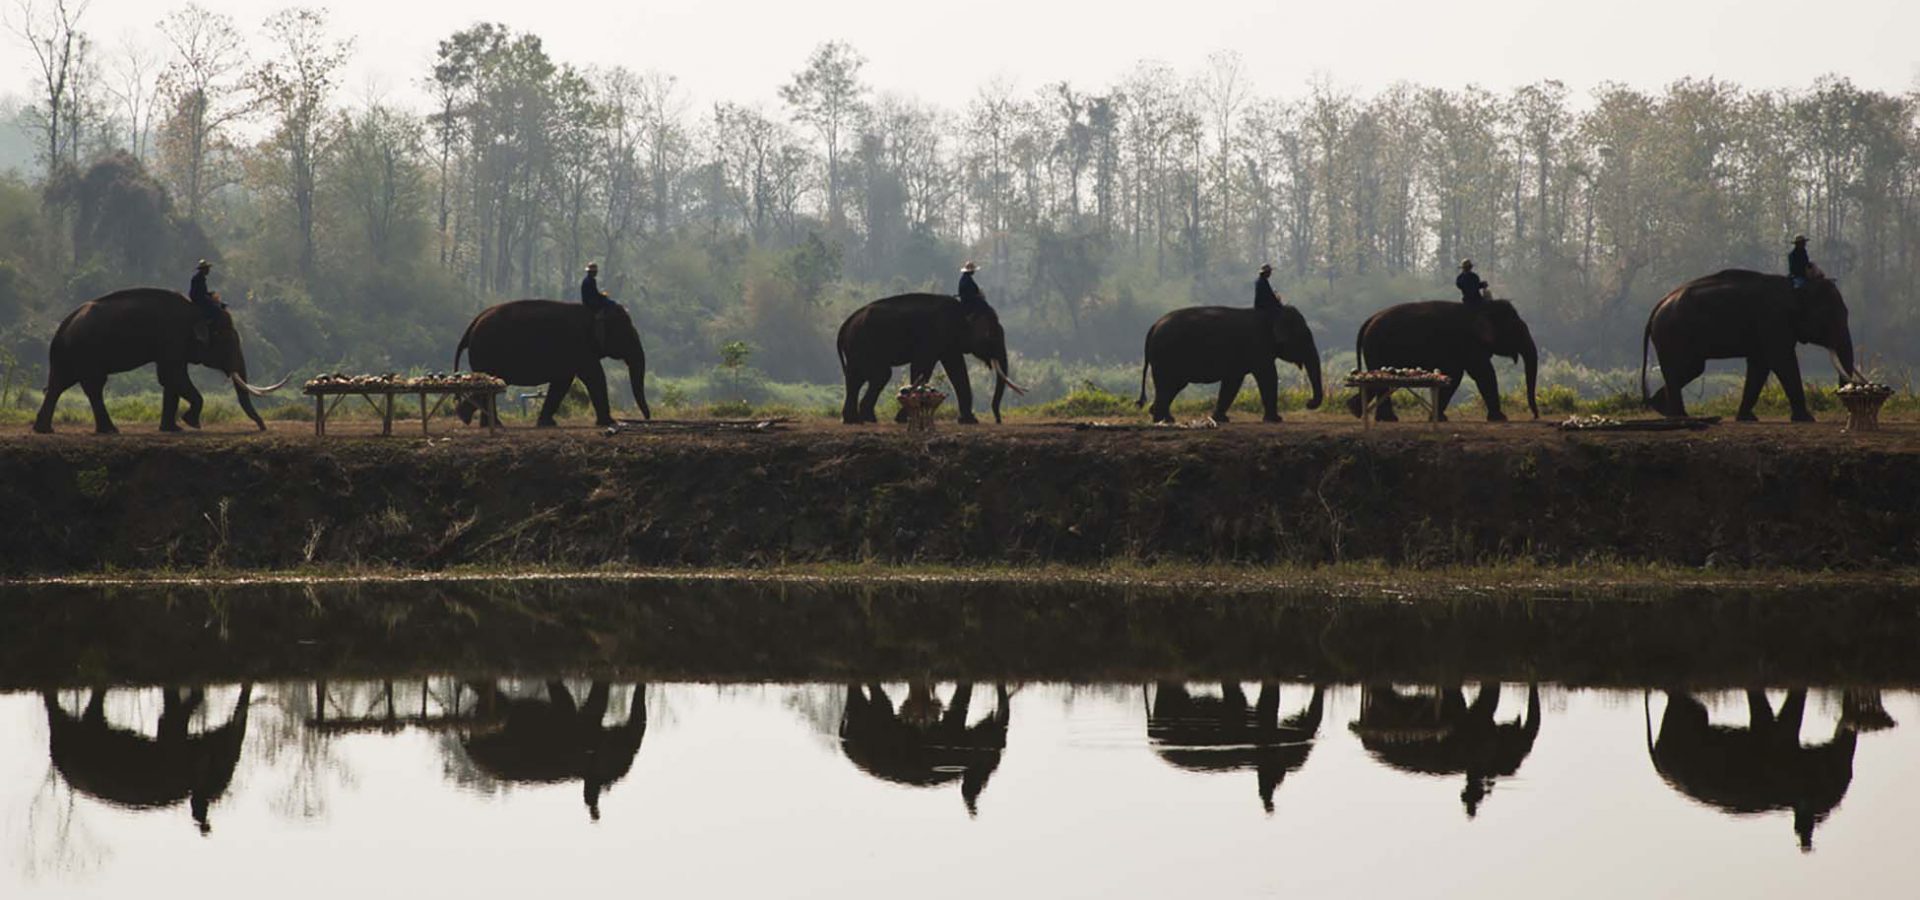 Elephants walking in a line next to river